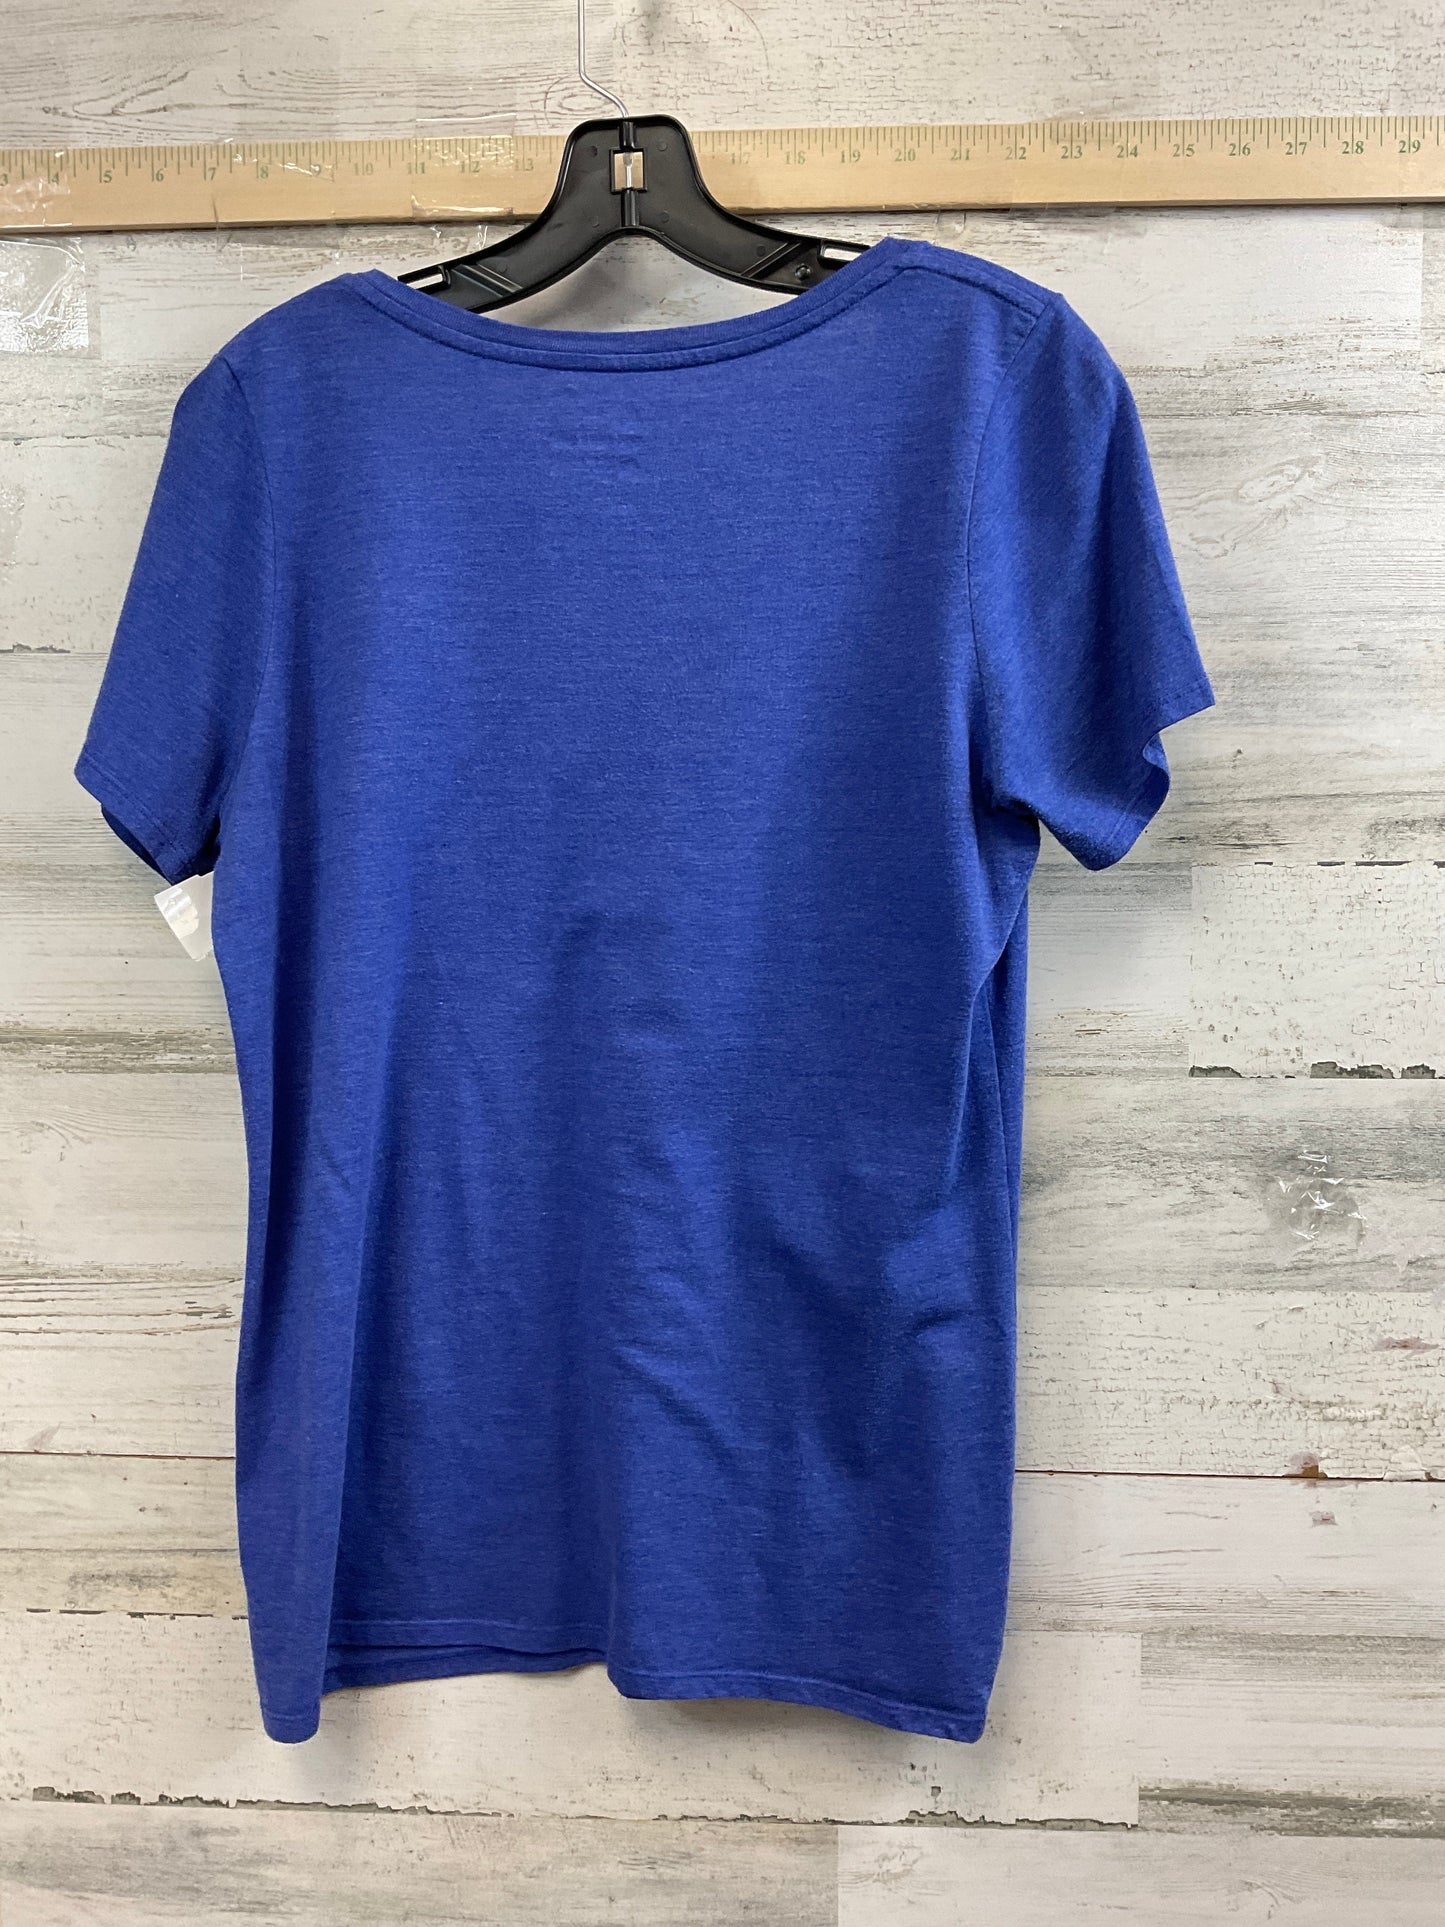 Blue Athletic Top Short Sleeve Nike Apparel, Size L